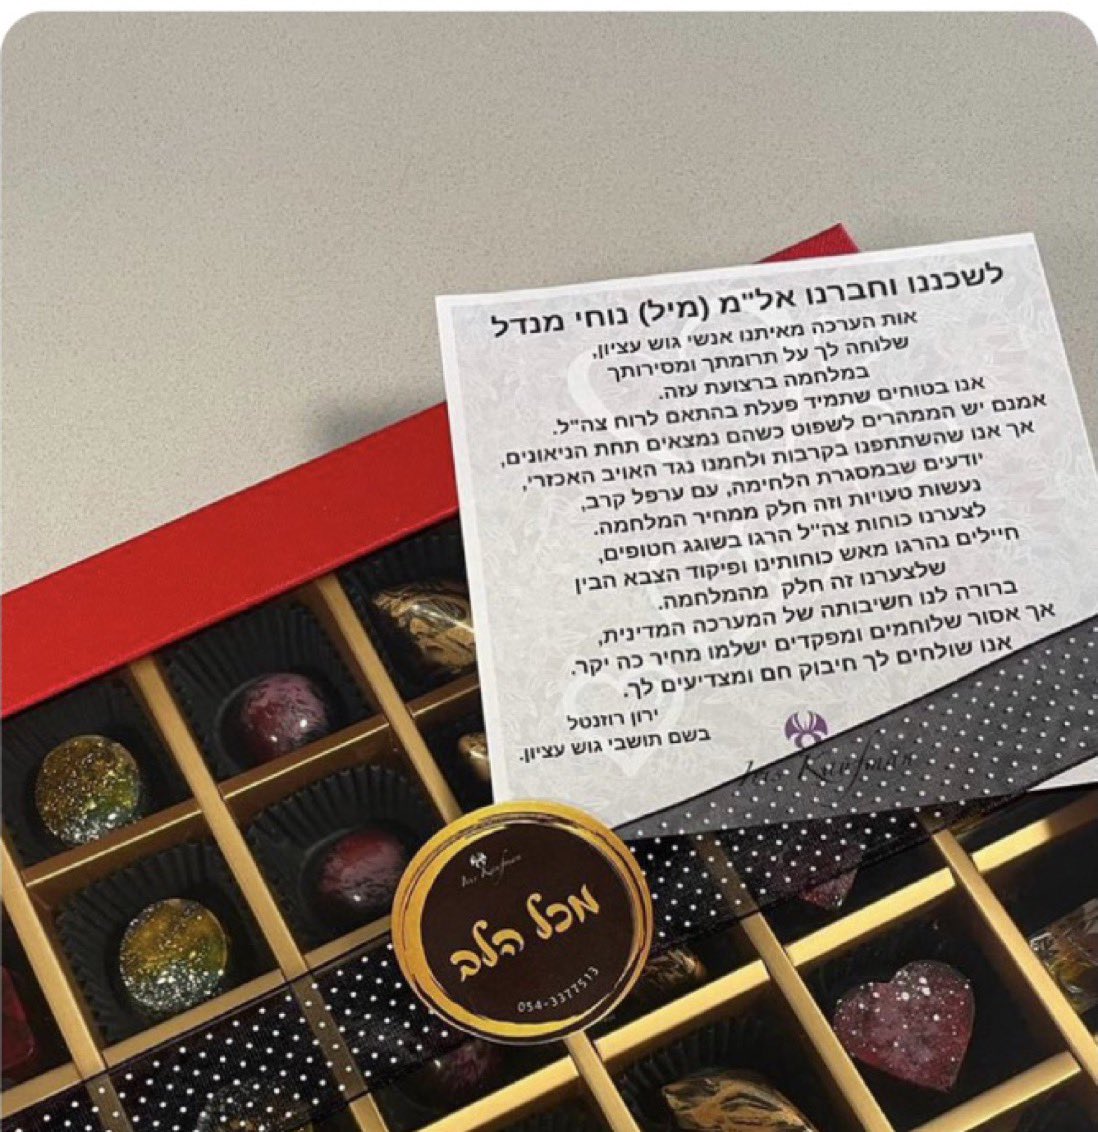 🚨#BREAKING: The head of the Gush Etzion settlement regional council sent a box of chocolates to the IDF officer who was dismissed after the killing of the 7 World Central Kitchen aid workers… They literally REWARDED him for MURDERING CIVILIANS! WTF?!! 🤬